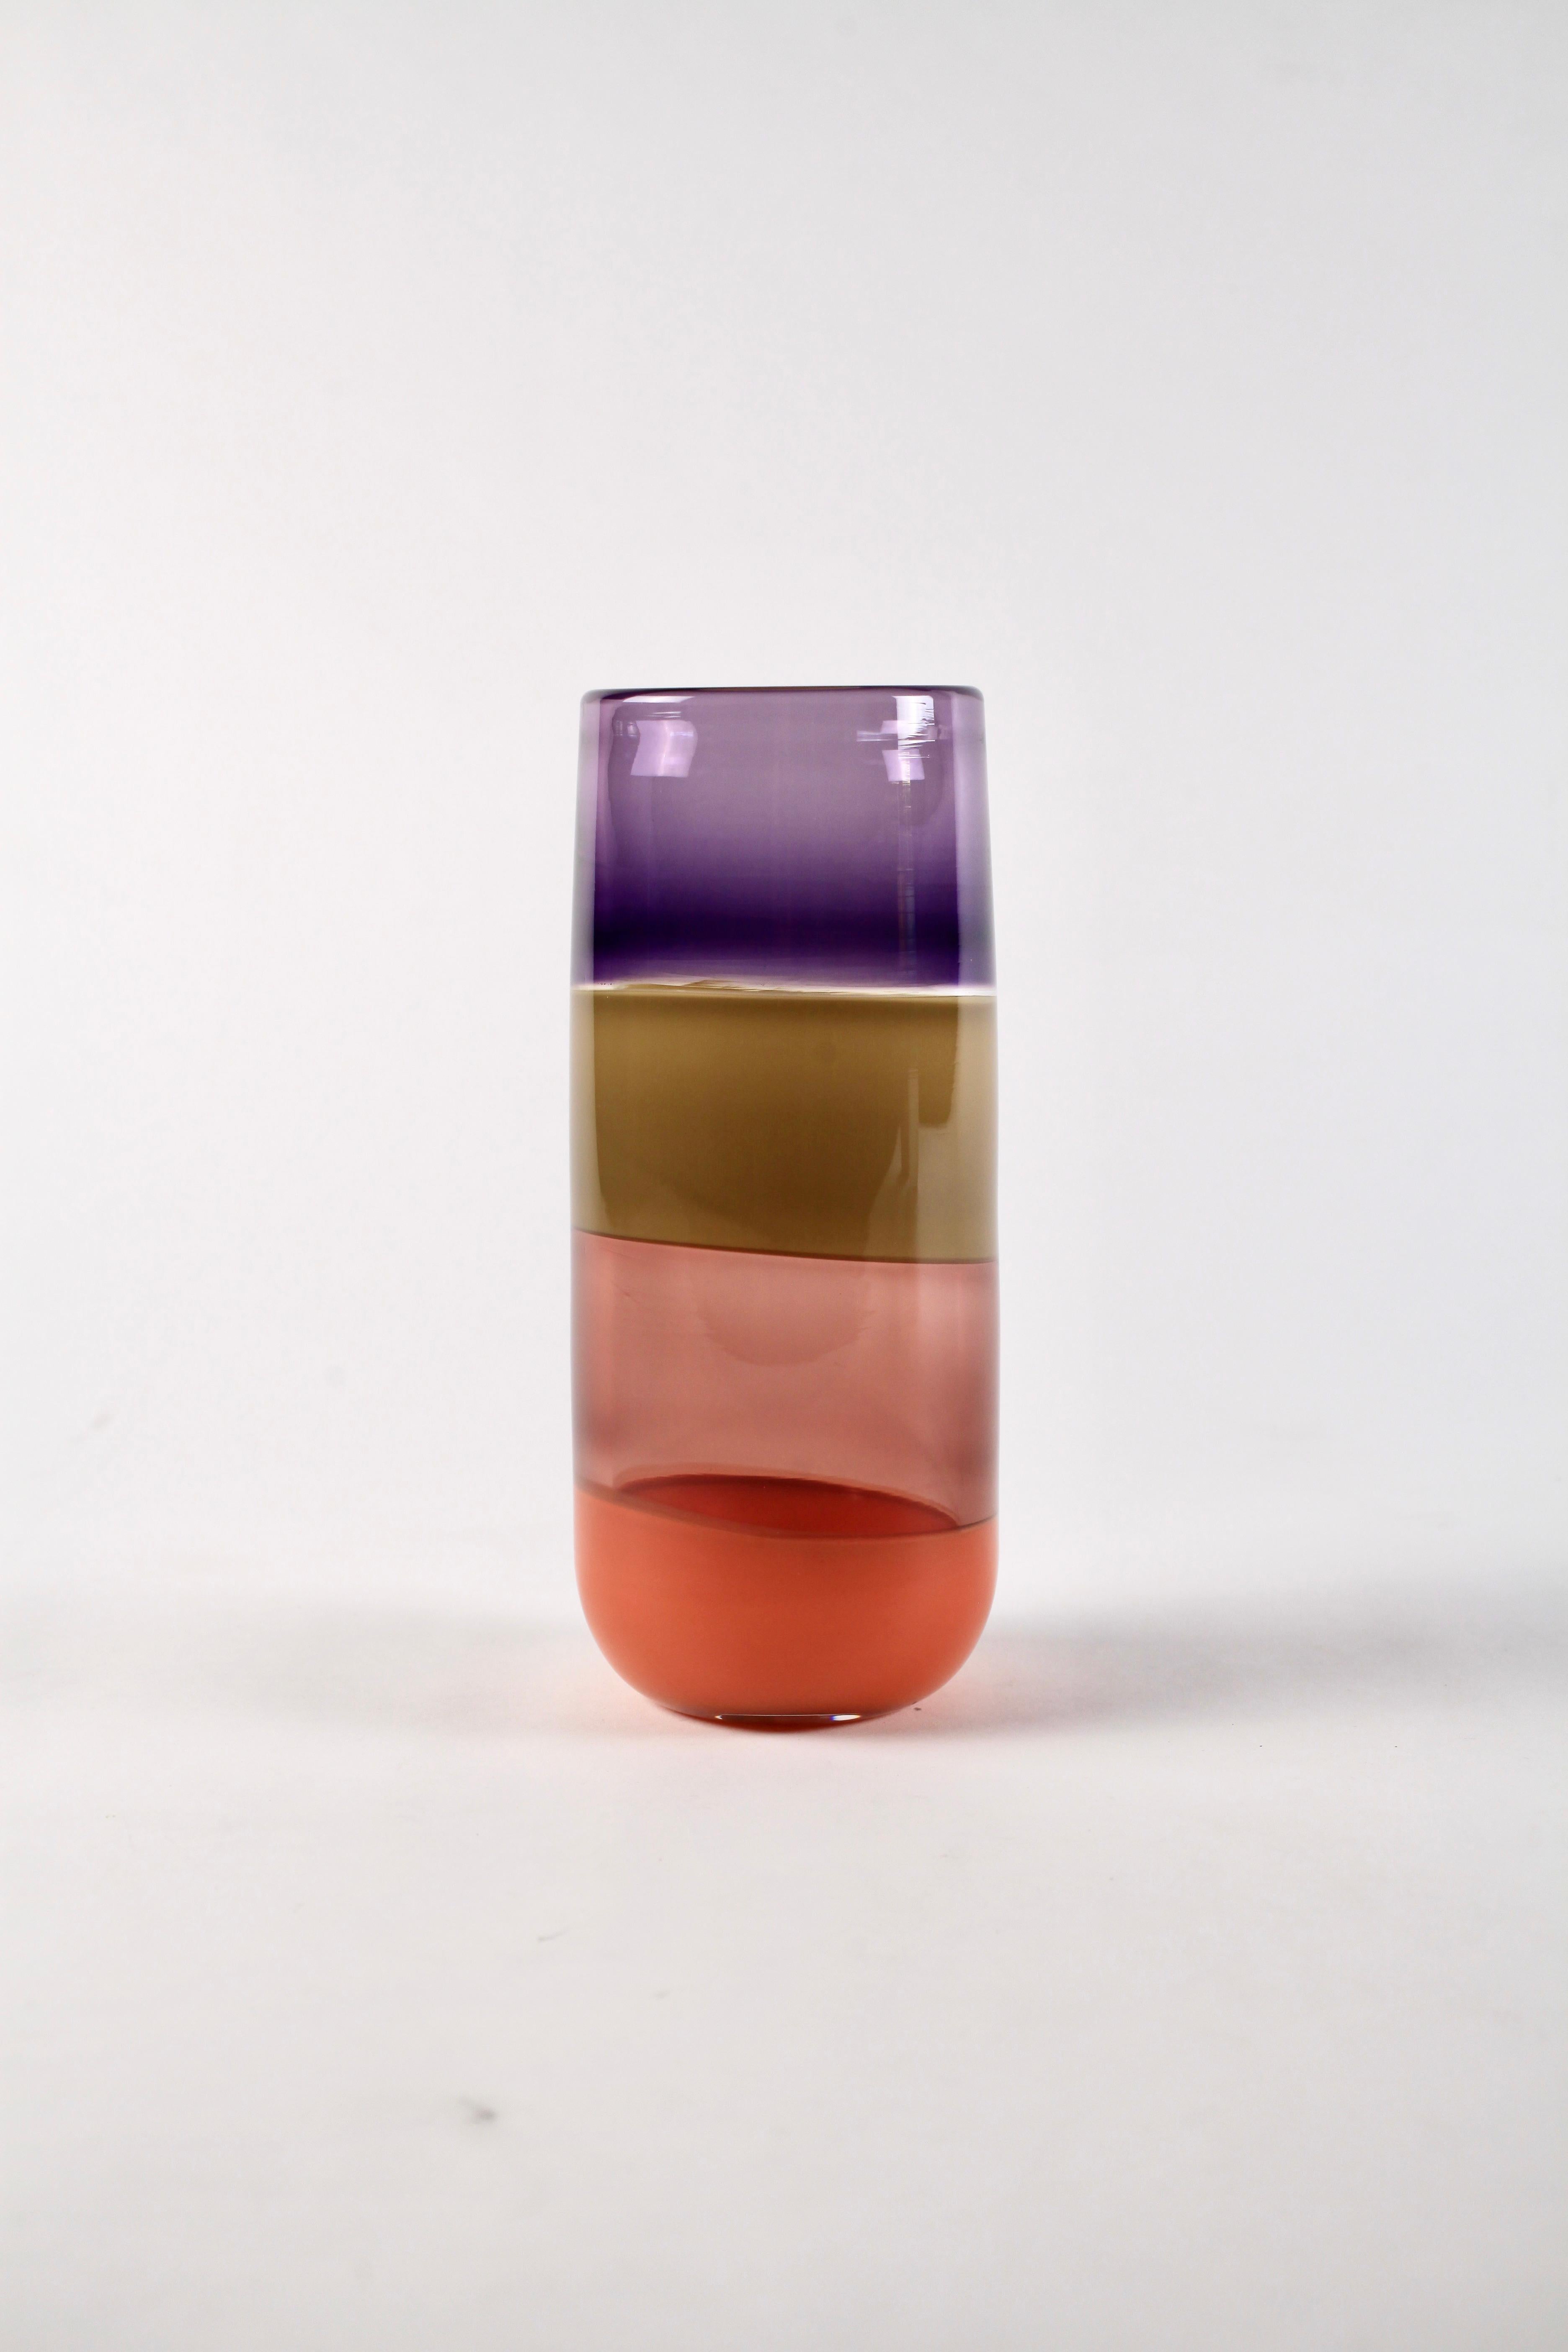 This colorful incalmo striped cylinder vase by Elizabeth Lyons will be sure to add a rich pop of color and a statement to any space. With the interaction of hue, opacity and saturation in mind, four distinct colors have been carefully selected for